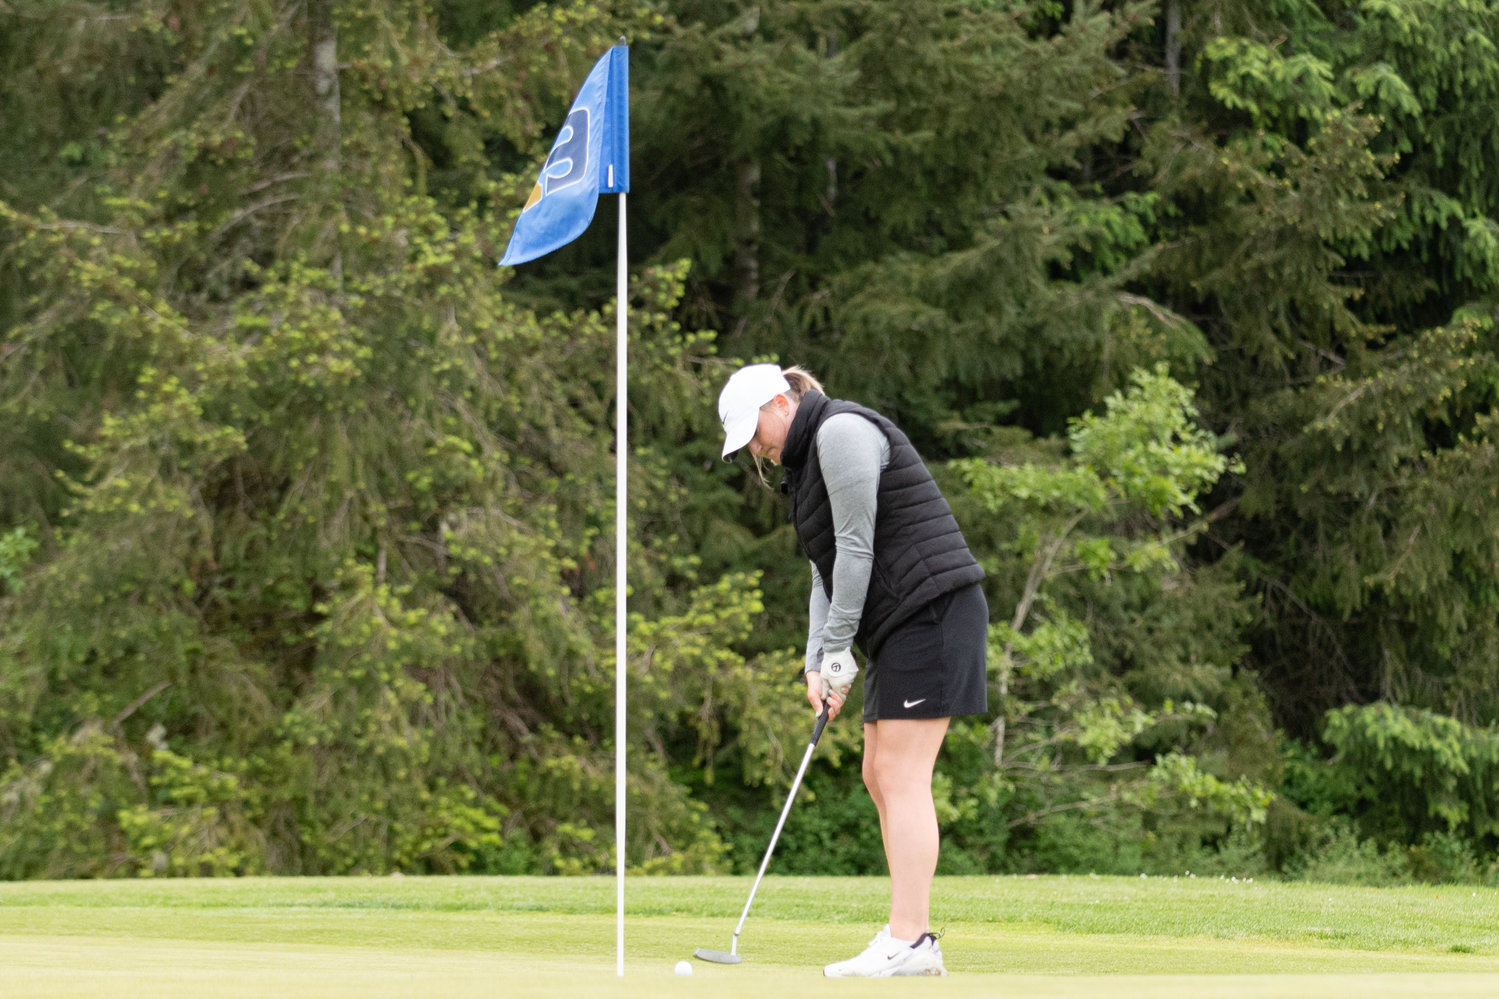 W.F. West golfer Natalie Eklund angles a short put at the 11th hole at Tumwater Valley Golf Course on the first day of the 2A State Girls Golf Championships May 24.